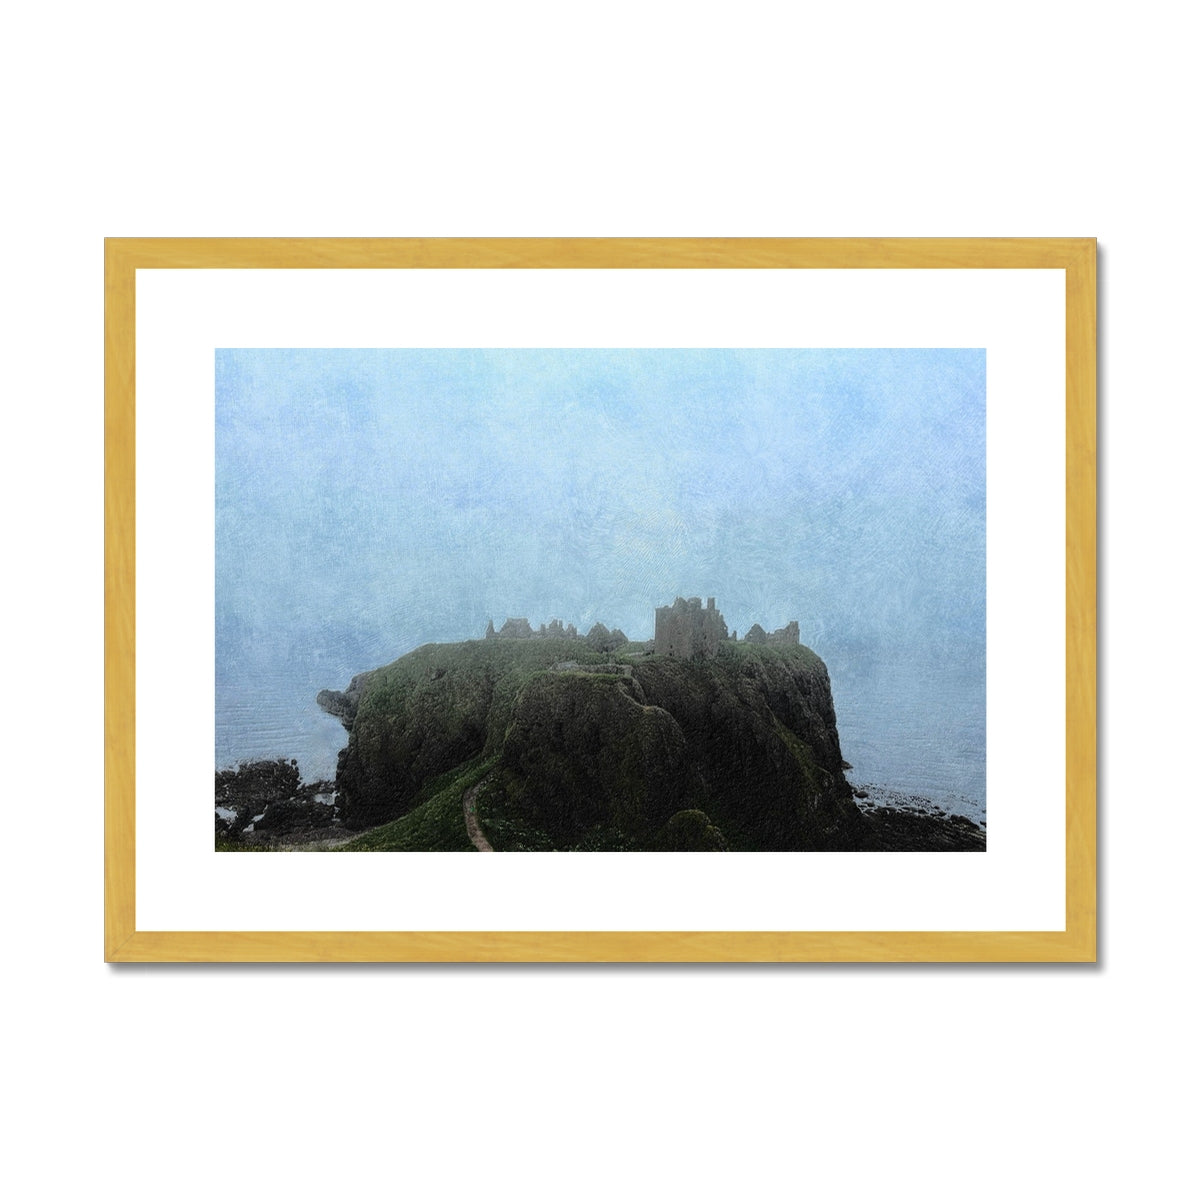 Dunnottar Castle Mist Painting | Antique Framed & Mounted Prints From Scotland-Antique Framed & Mounted Prints-Scottish Castles Art Gallery-A2 Landscape-Gold Frame-Paintings, Prints, Homeware, Art Gifts From Scotland By Scottish Artist Kevin Hunter